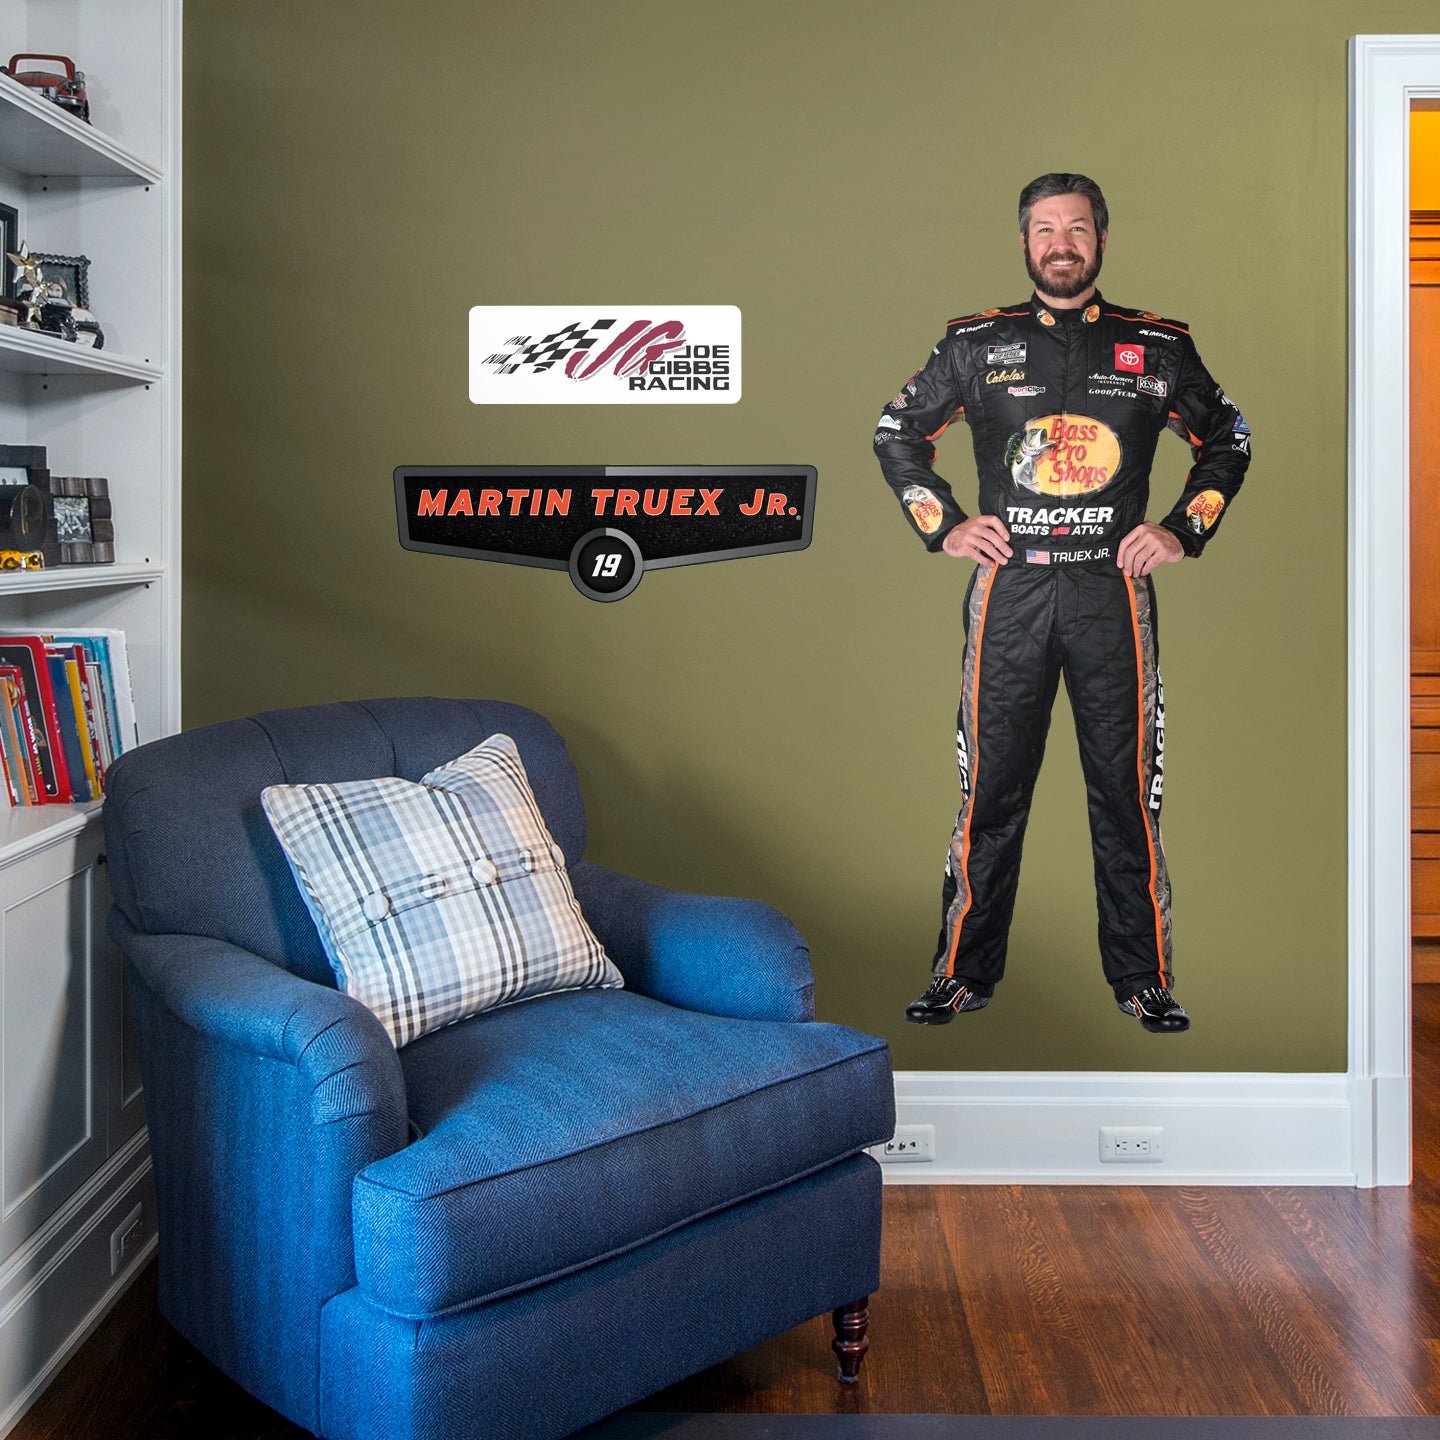 Martin Truex Jr. 2021 Driver - Officially Licensed NASCAR Removable Wall Decal Life-Size Character + 2 Decals (37"W x 70"H) by F